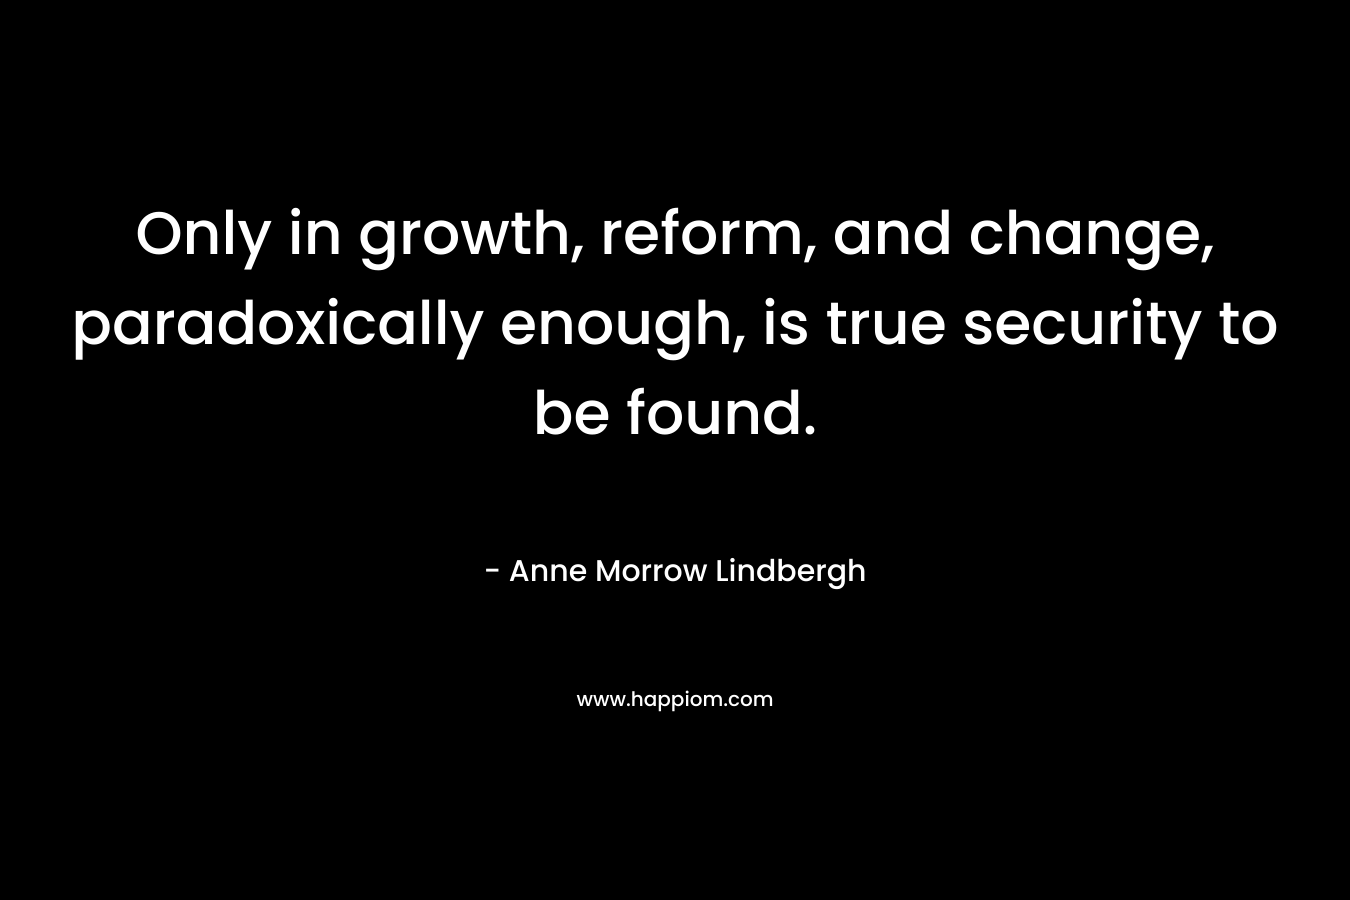 Only in growth, reform, and change, paradoxically enough, is true security to be found. – Anne Morrow Lindbergh